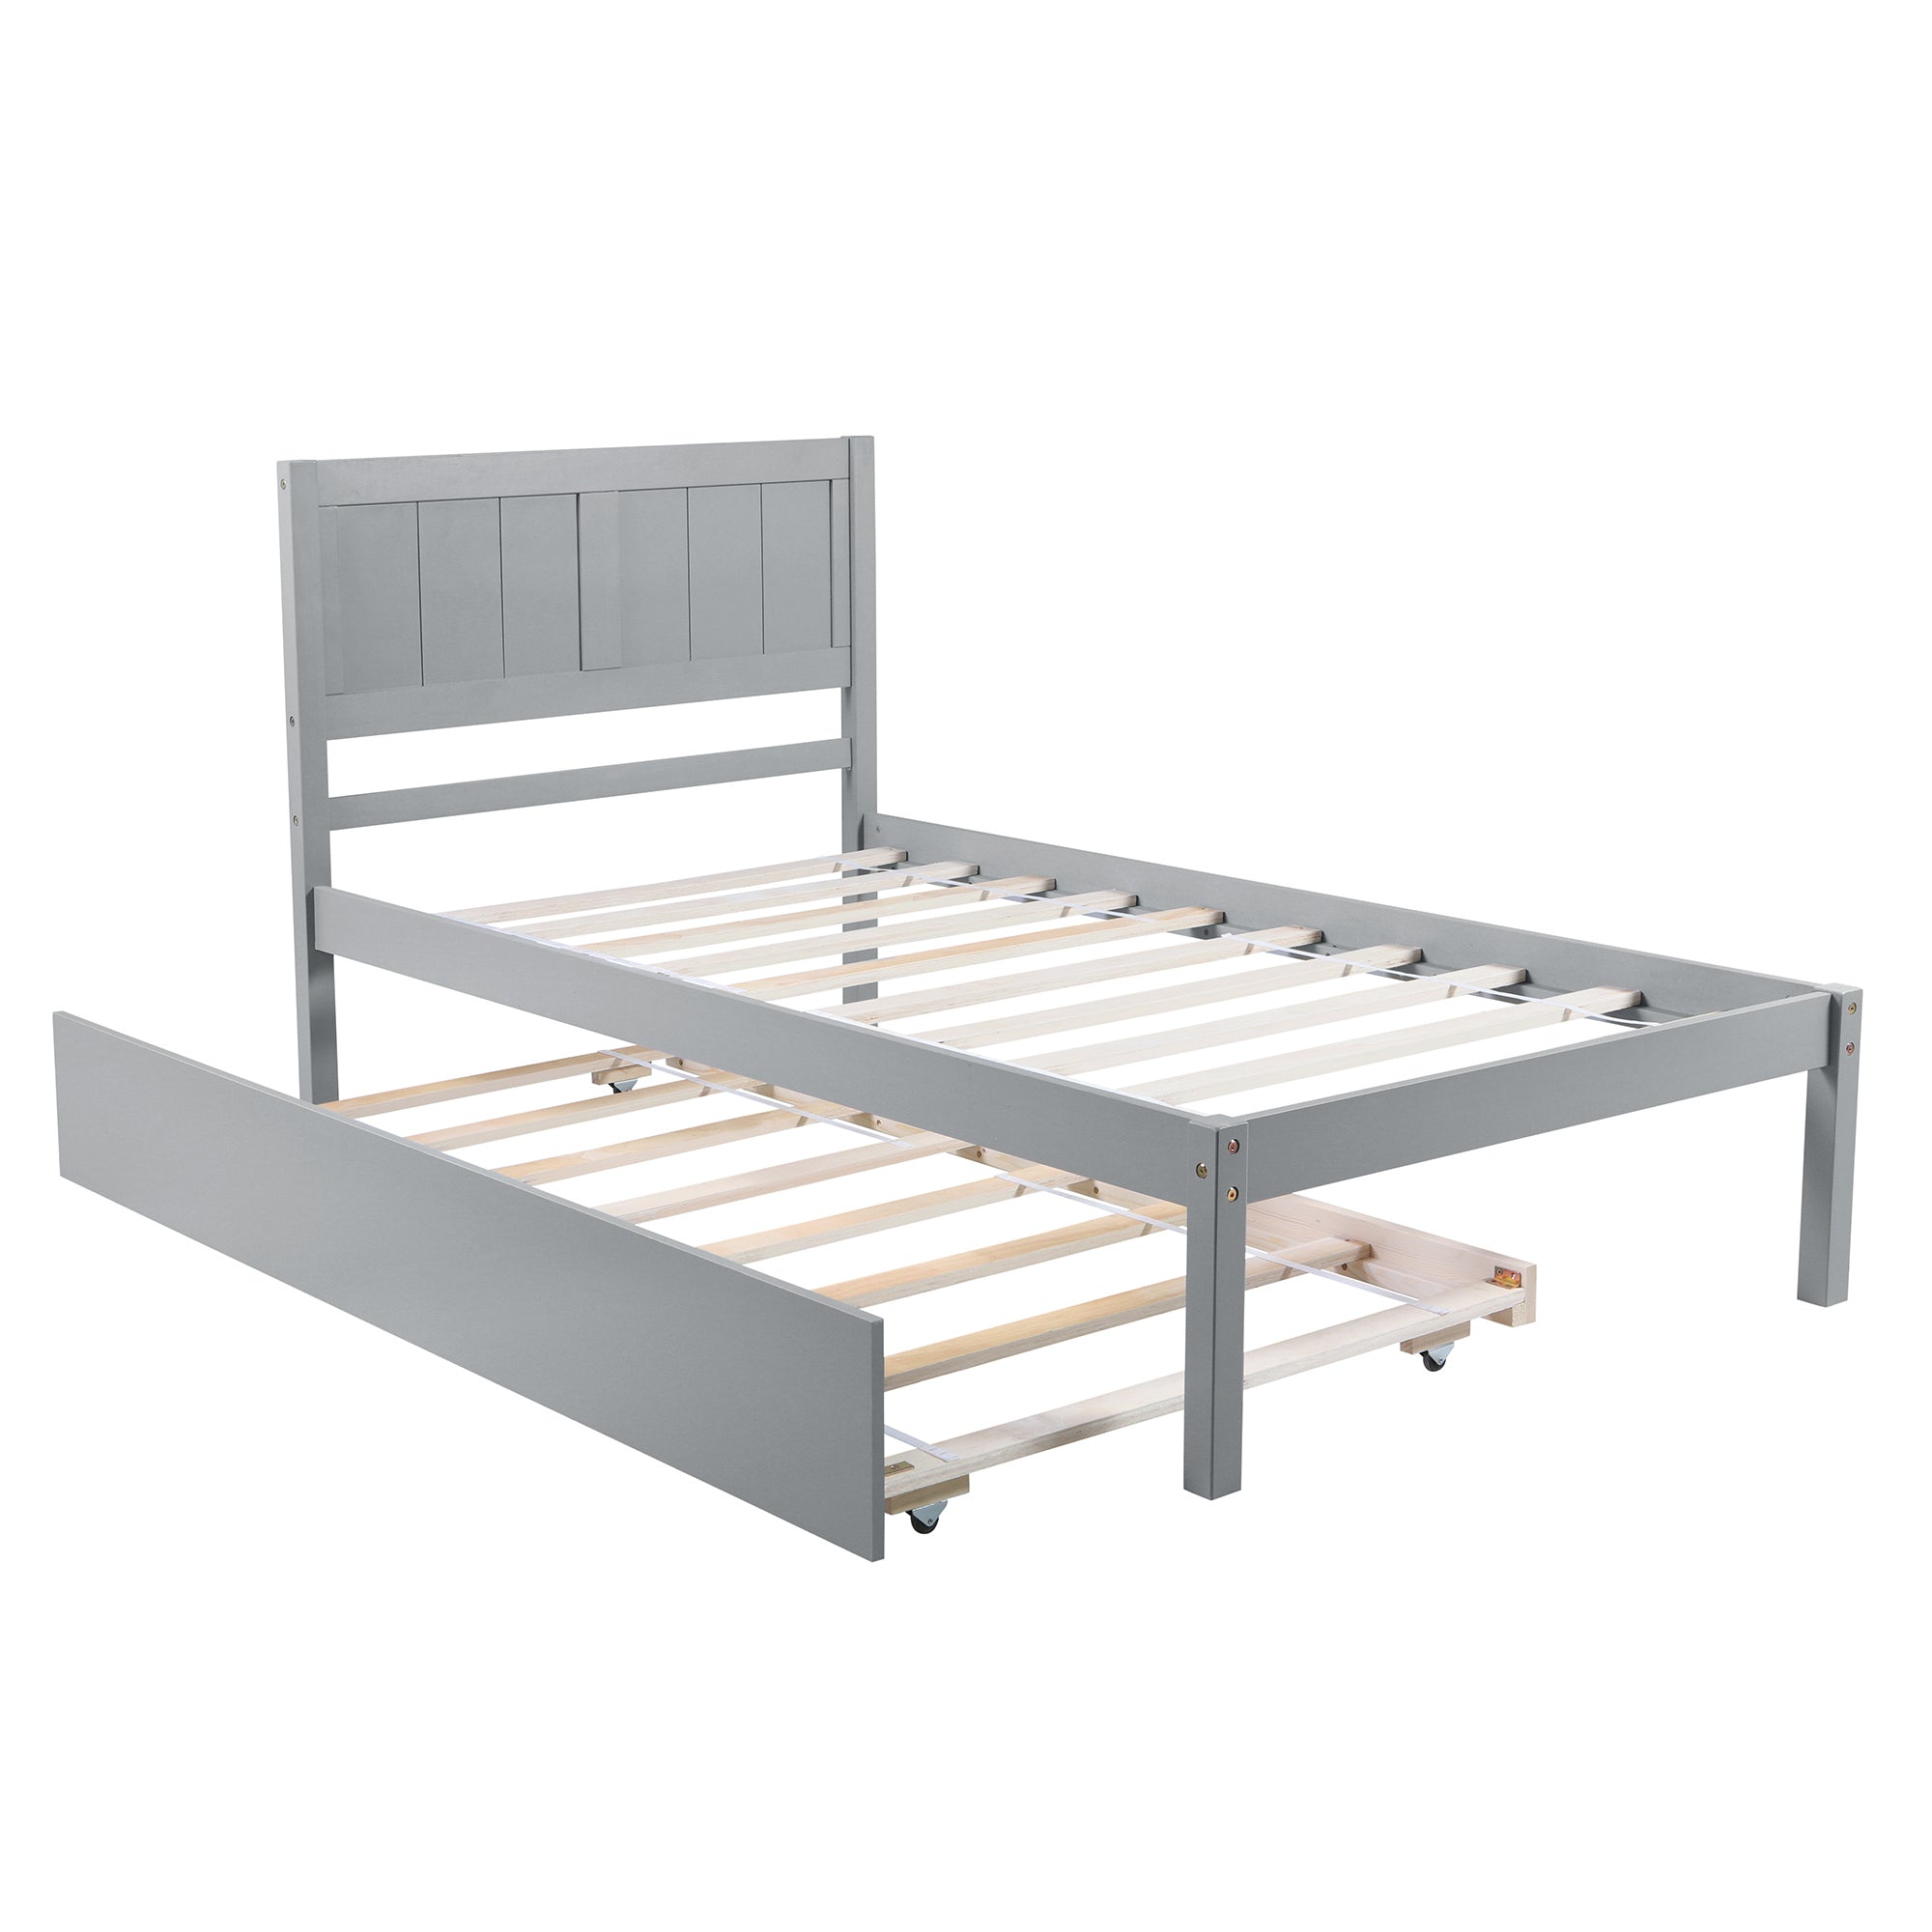 Twin size Platform Bed Wood Platform Bed with Trundle gray-solid wood